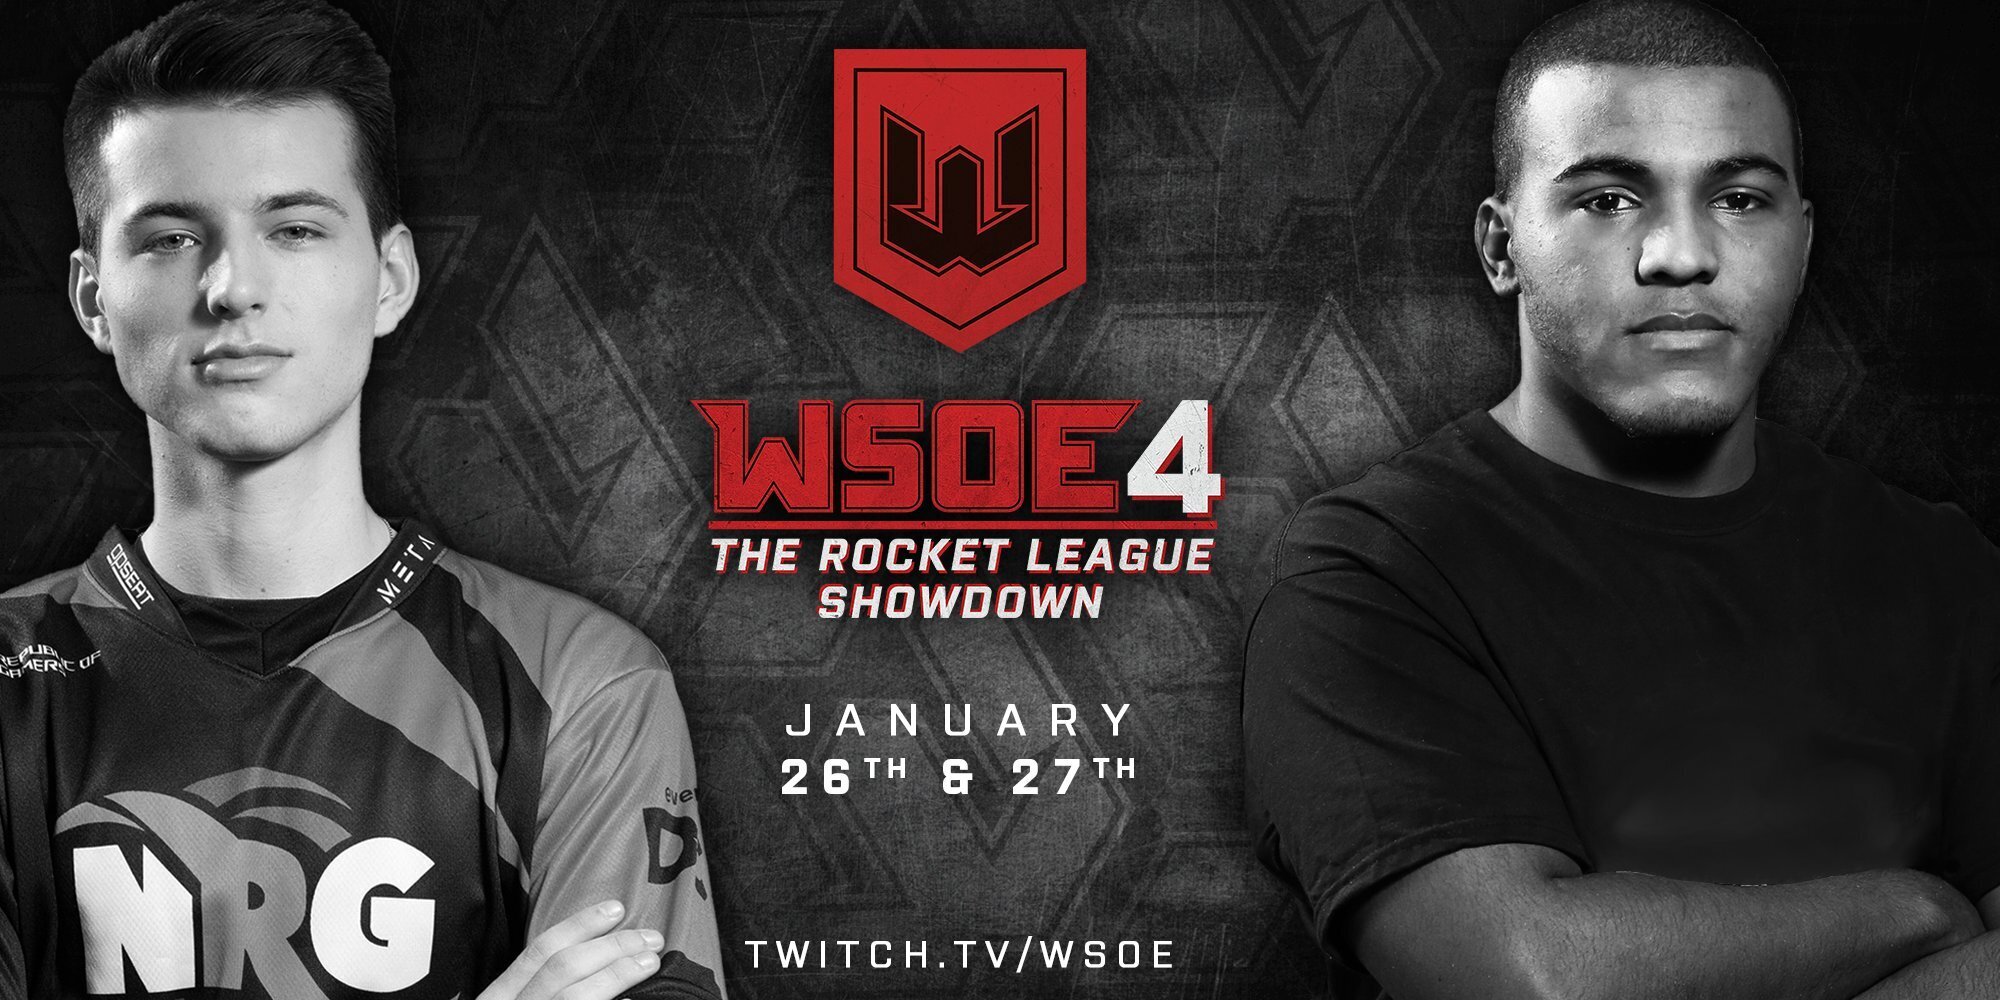 The World Showdown of Esports - better known as WSOE - is moving to Rocket League as the fourth game of the tournament series. Previous WSOE events featured Dota 2, Hearthstone and Fortnite, in that order.